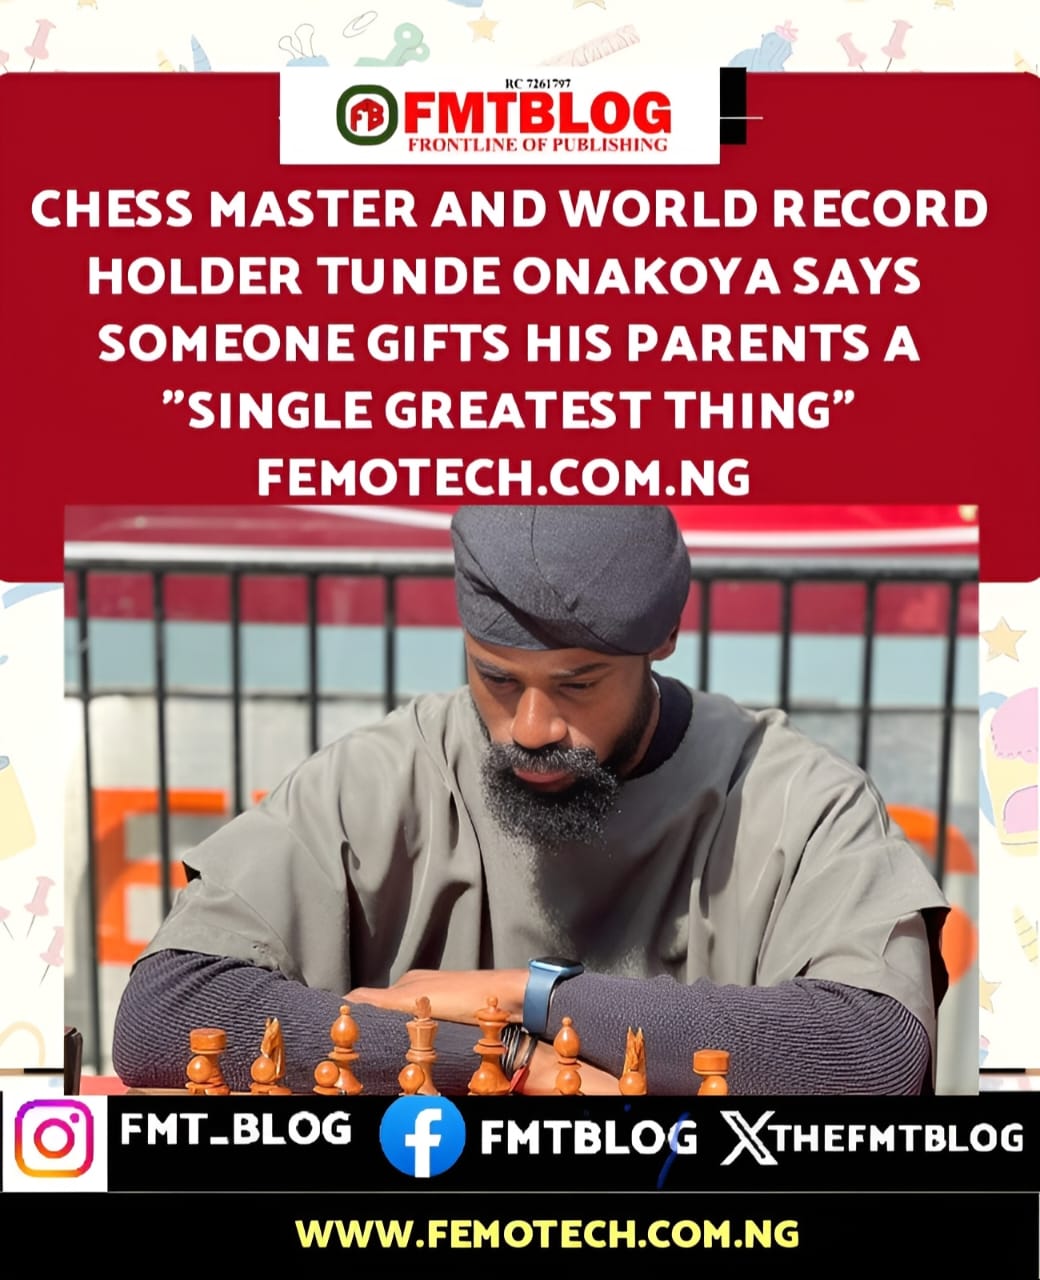 Chess Master And World Record Holder Tunde Onakoya Says Someone Gifts His Parents A ”Single Greatest Thing”